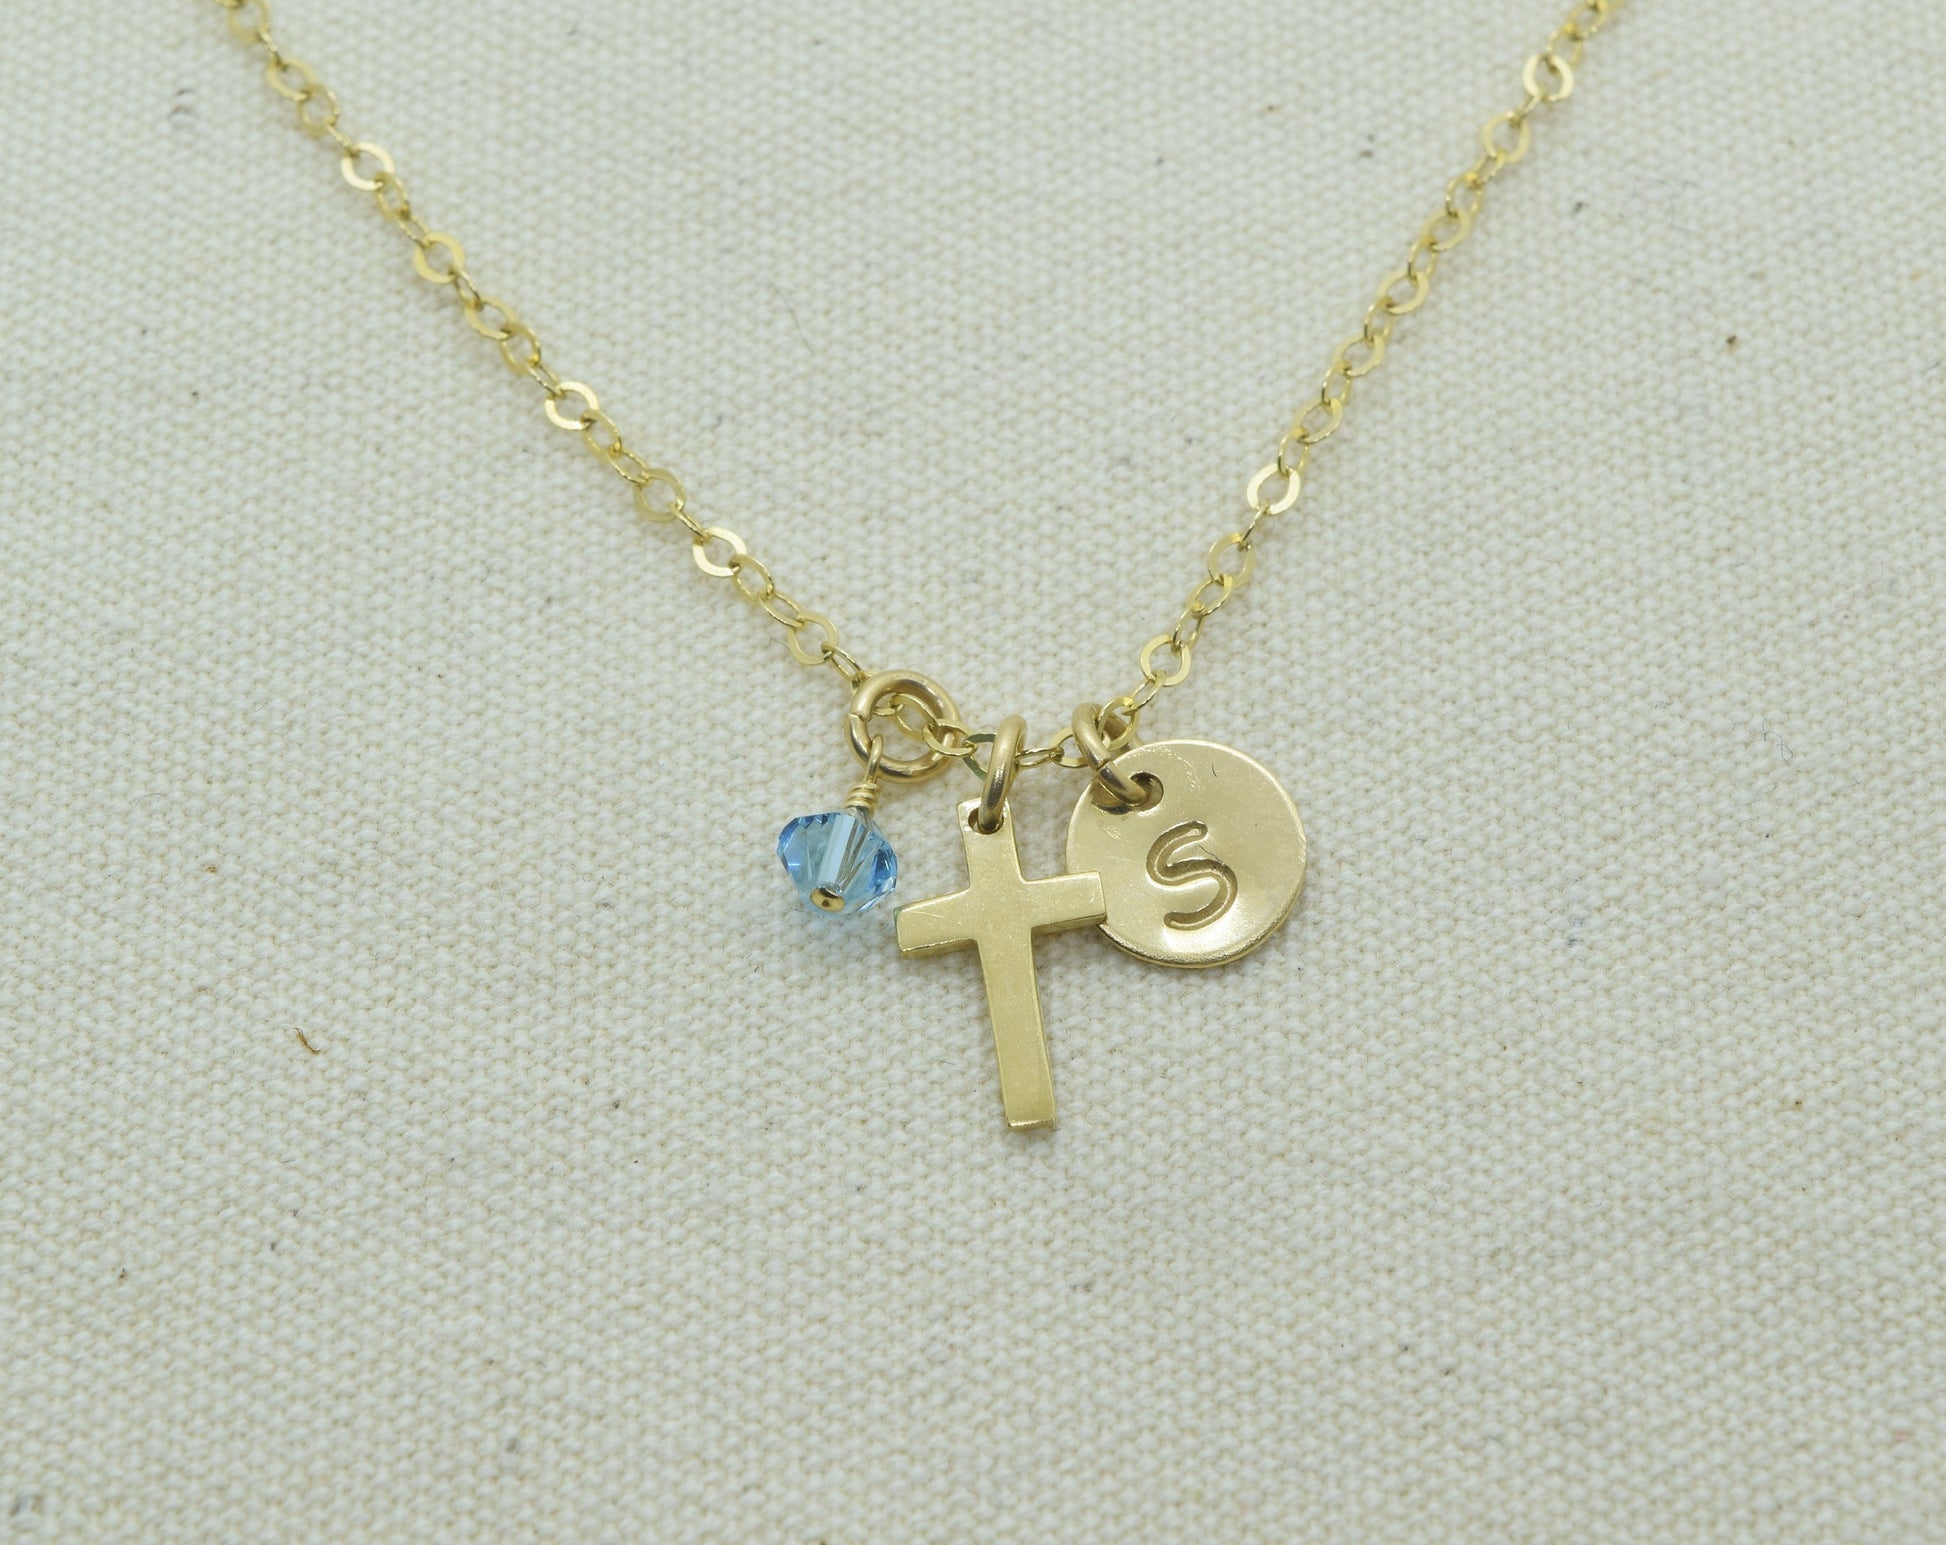 Tiny Gold Cross Charm Necklace, Small Cross Pendant, Baptism Christening Gift, First Communion, With Birthstone and Initial